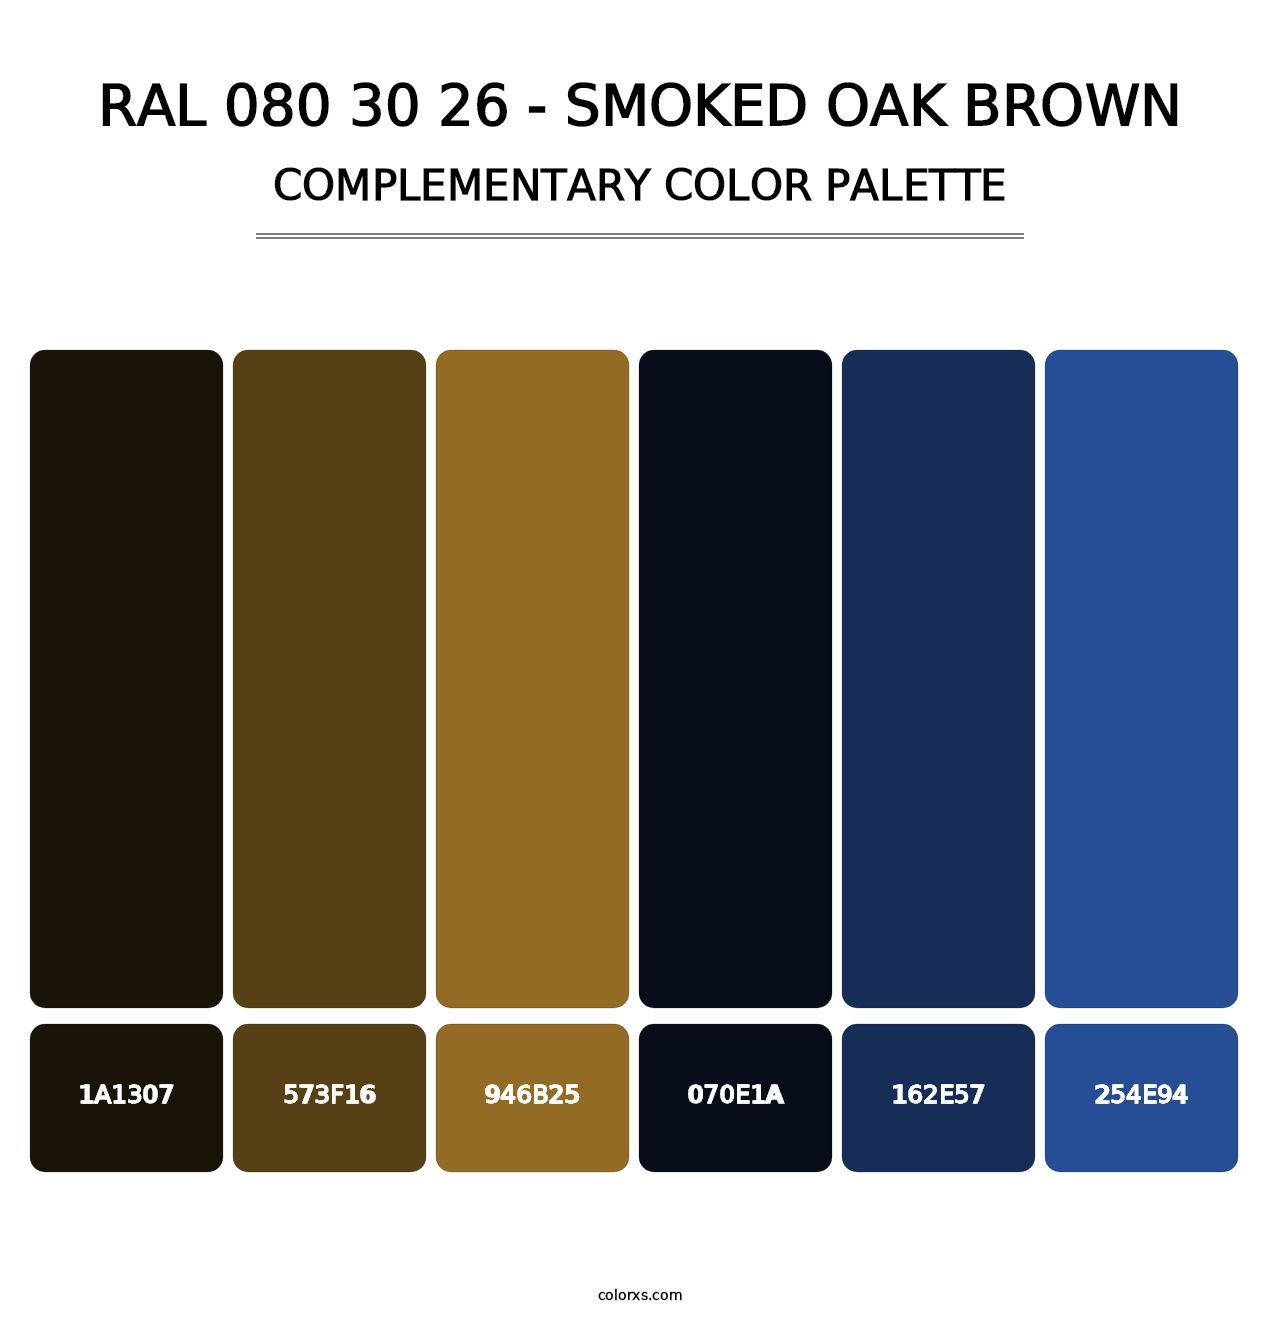 RAL 080 30 26 - Smoked Oak Brown - Complementary Color Palette